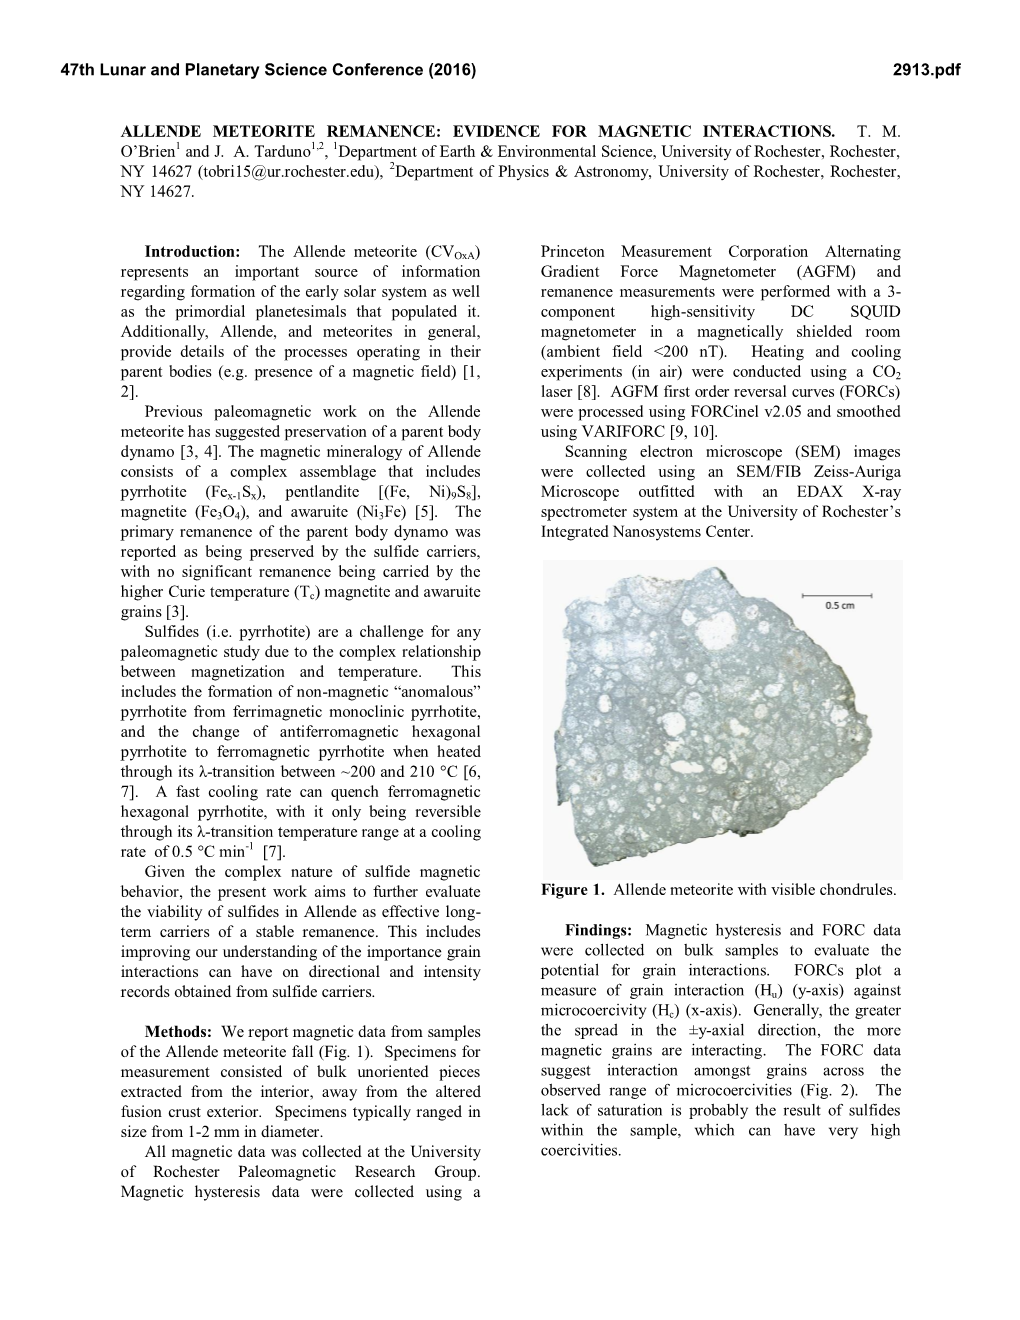 Allende Meteorite Remanence: Evidence for Magnetic Interactions